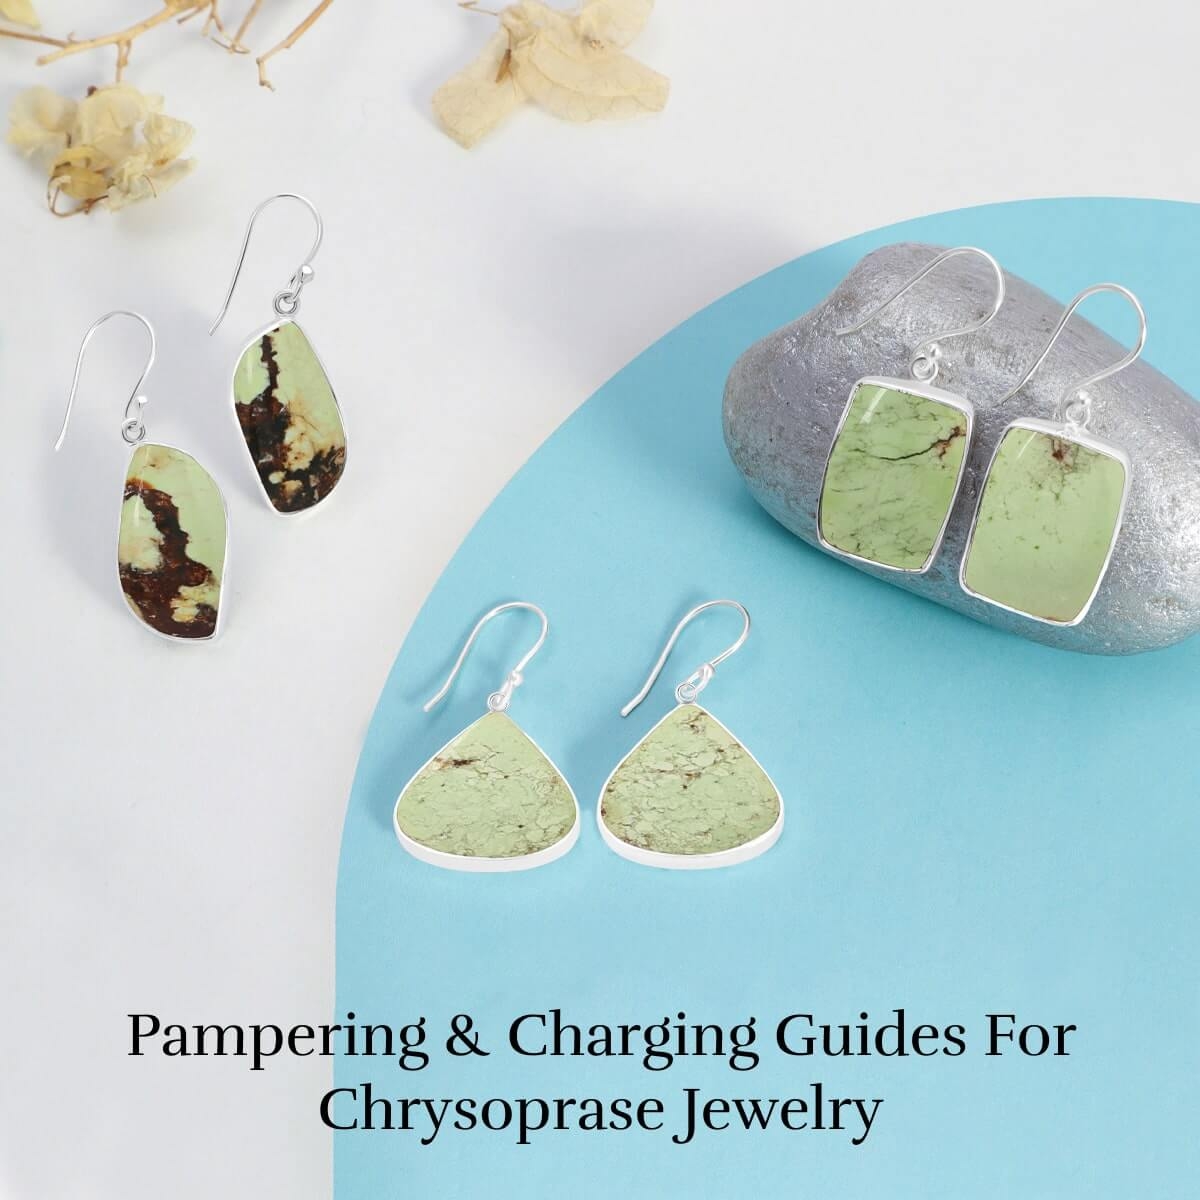 How to Care & Cleanse for Chrysoprase Jewelry